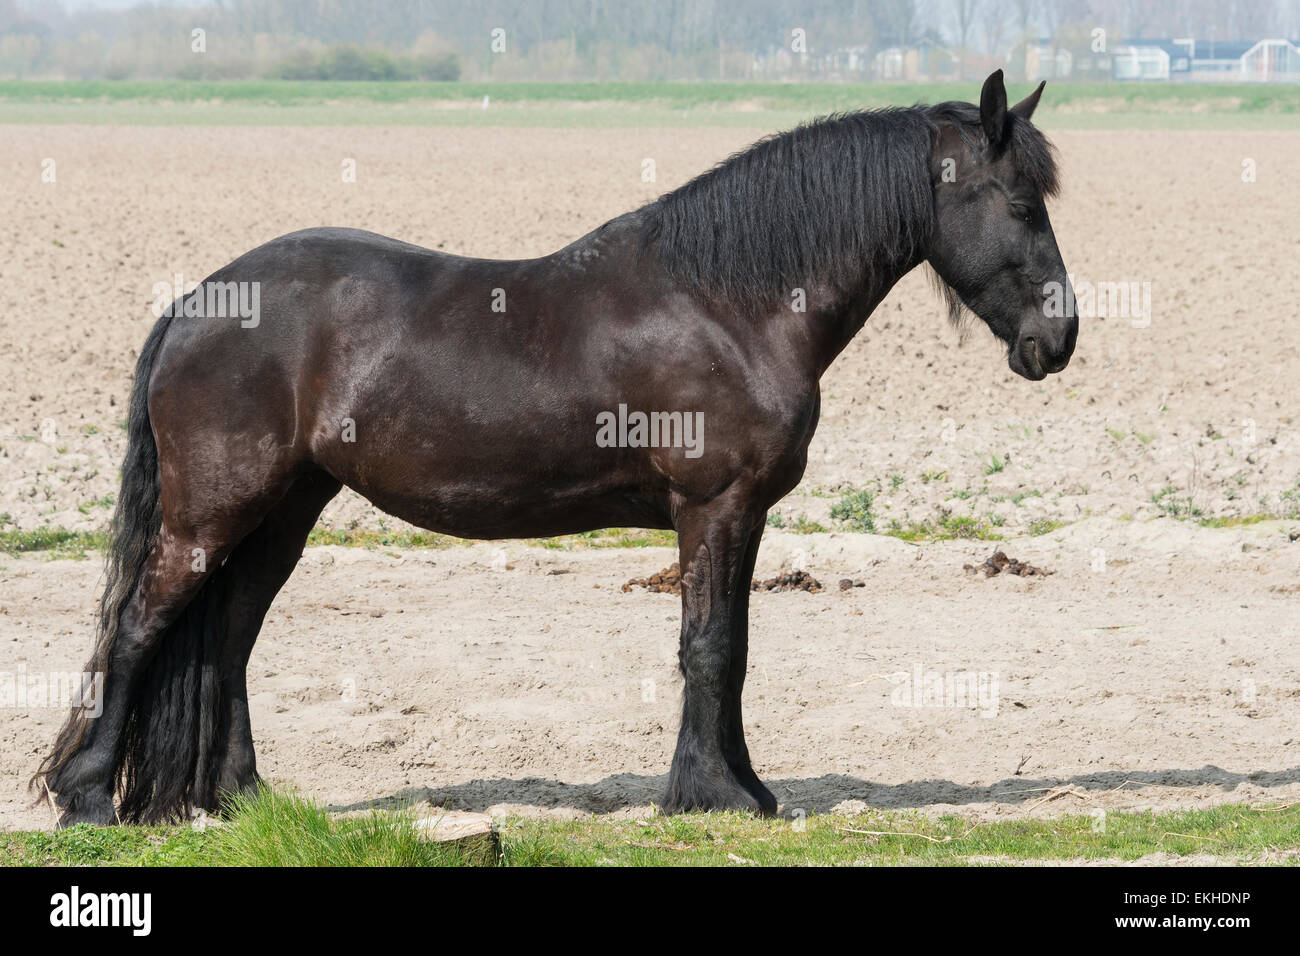 big brown horse standing in the field siteview Stock Photo